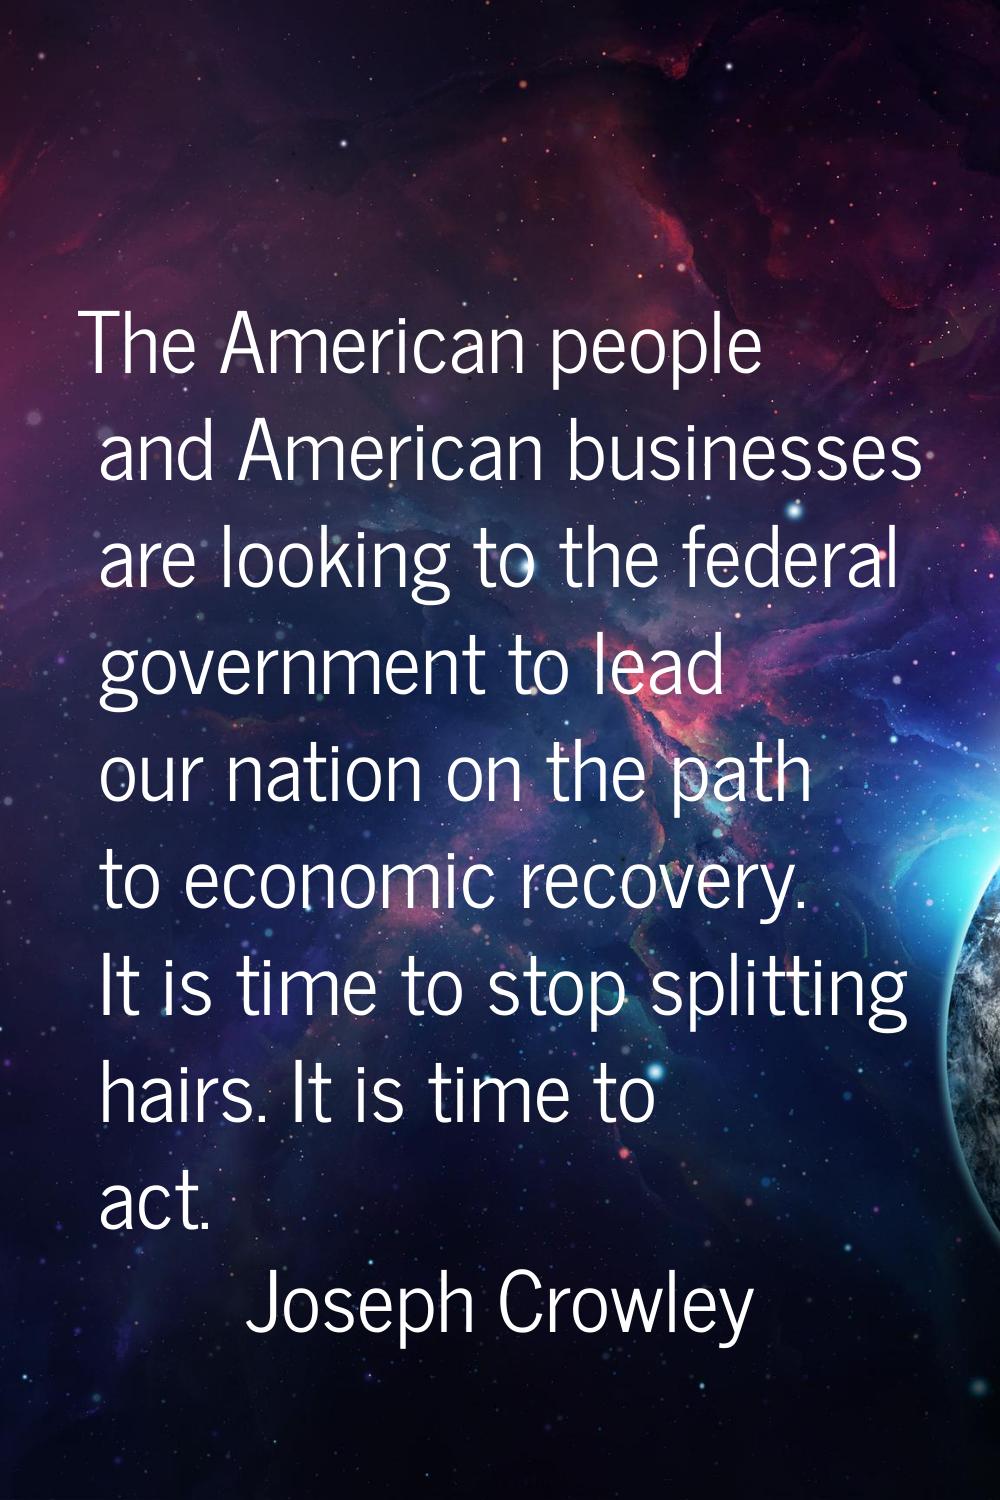 The American people and American businesses are looking to the federal government to lead our natio